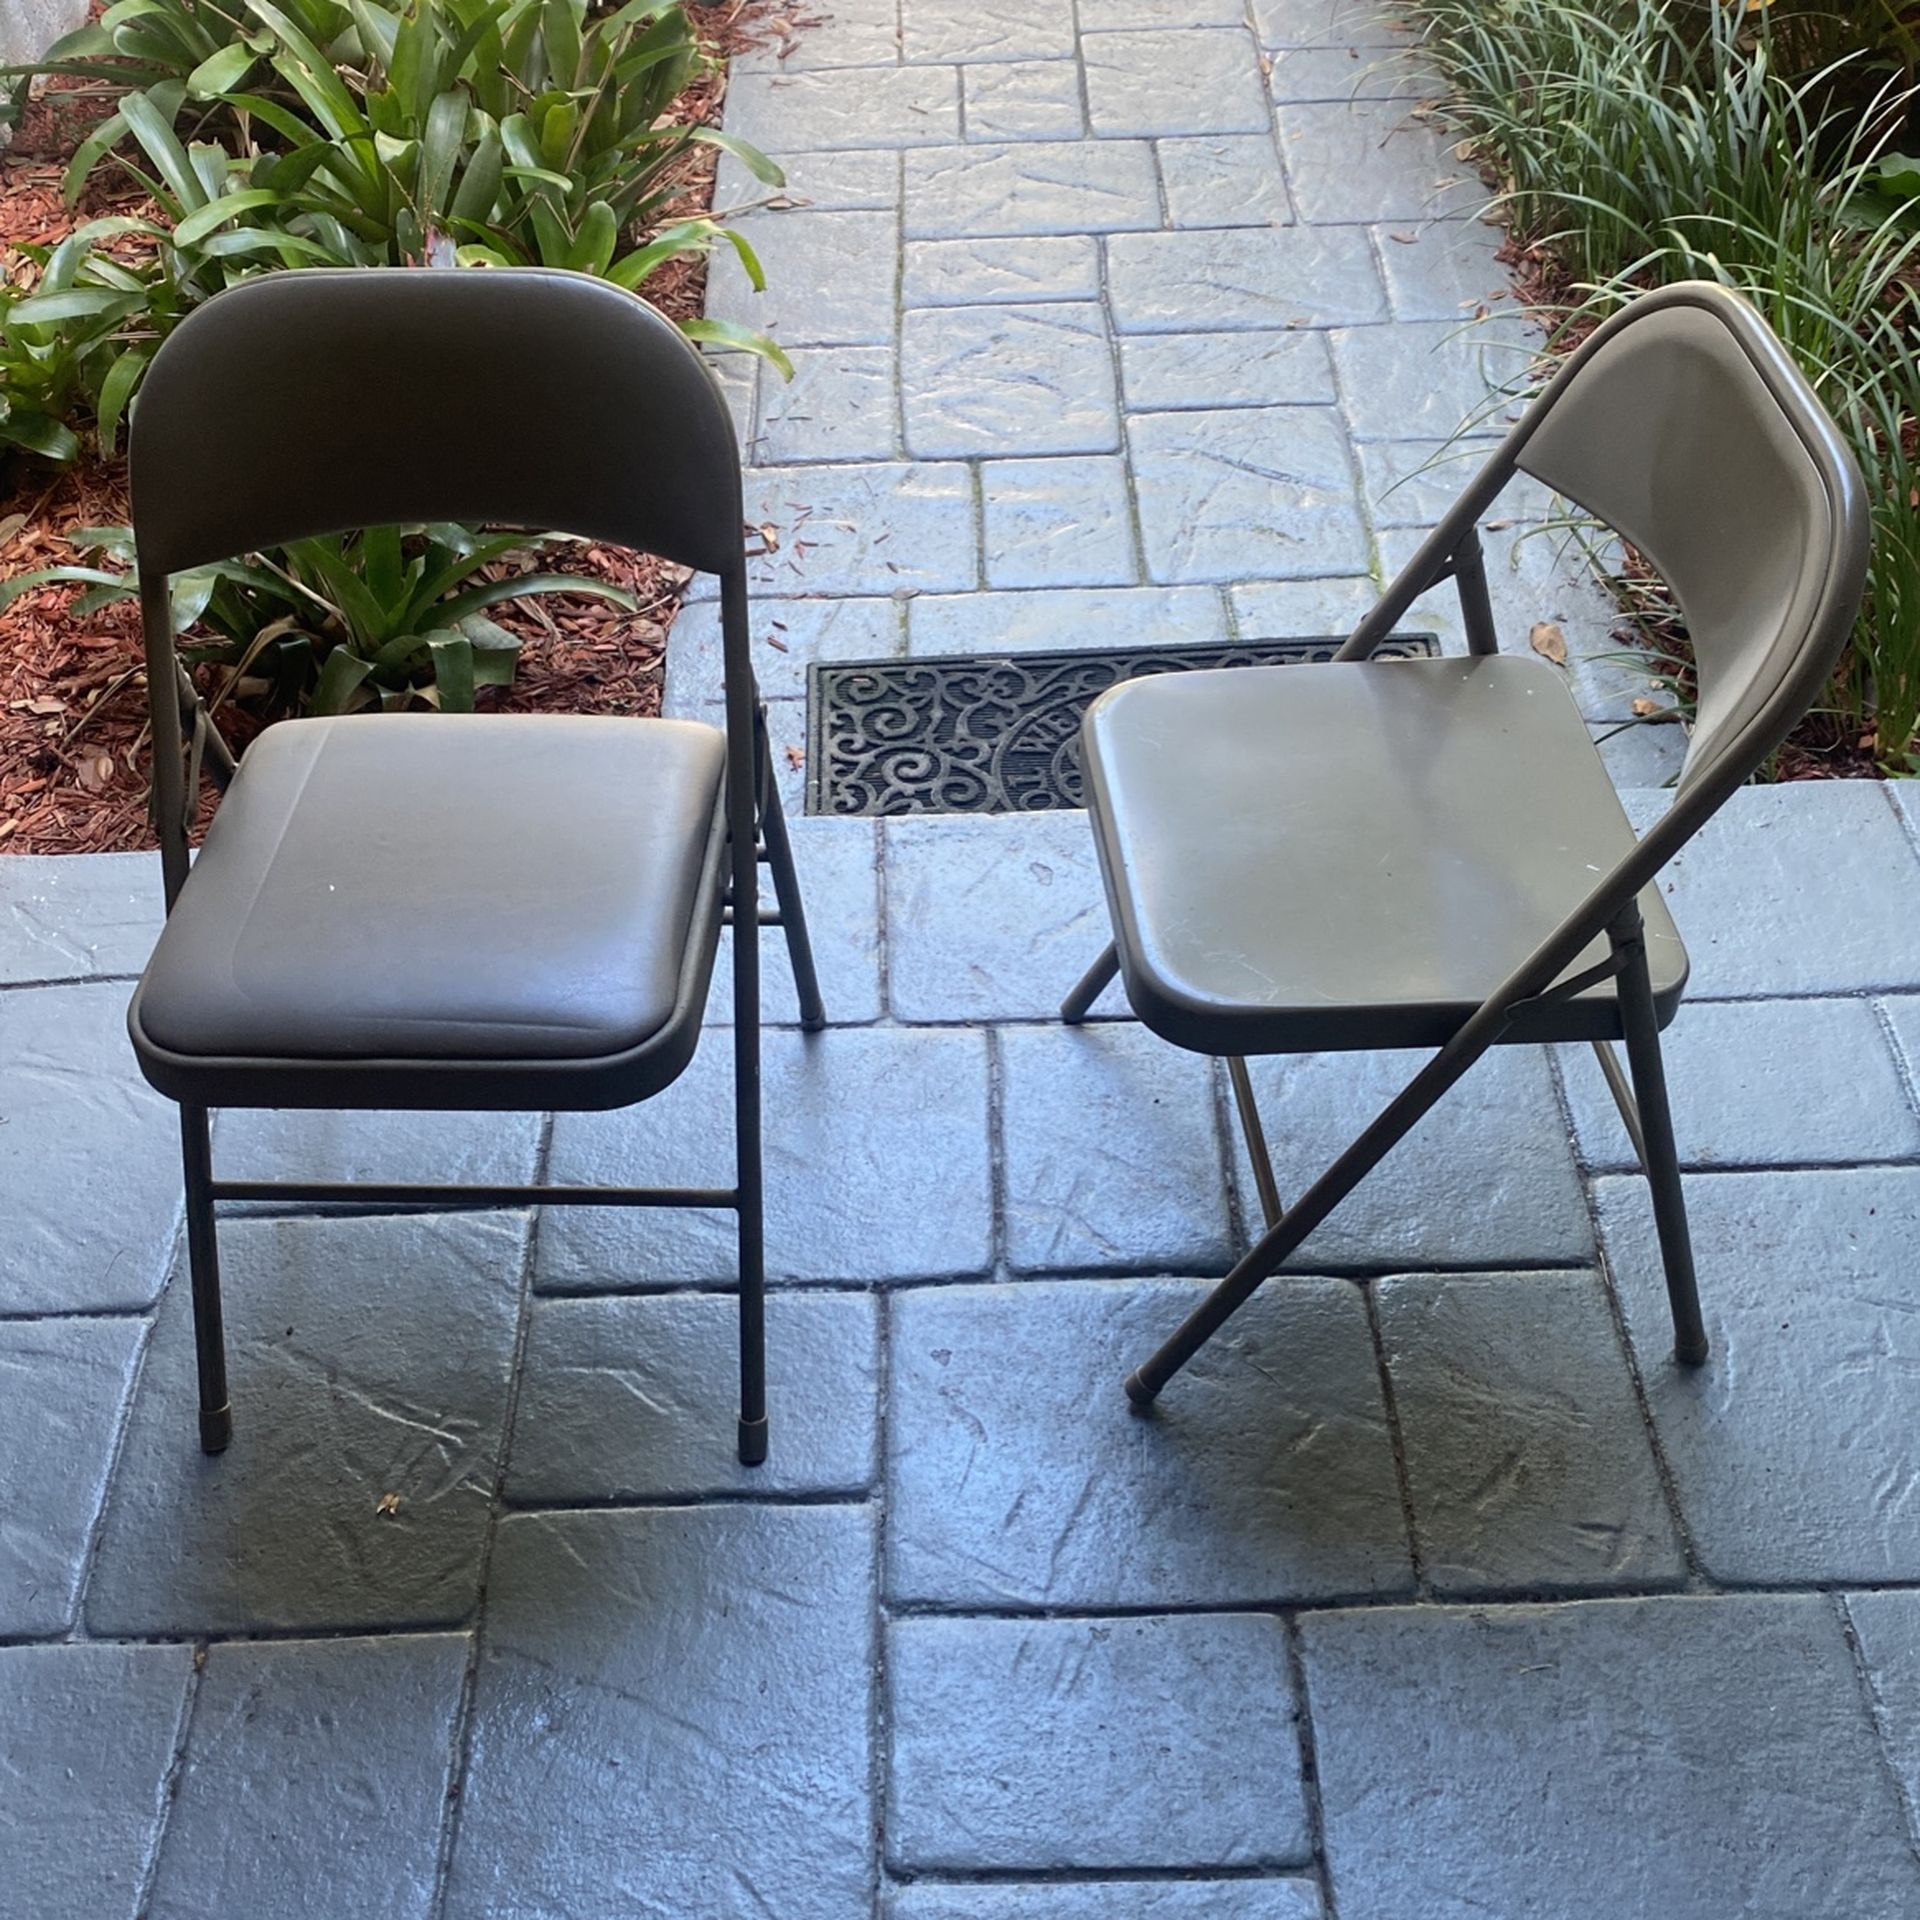 Metal foldable chairs